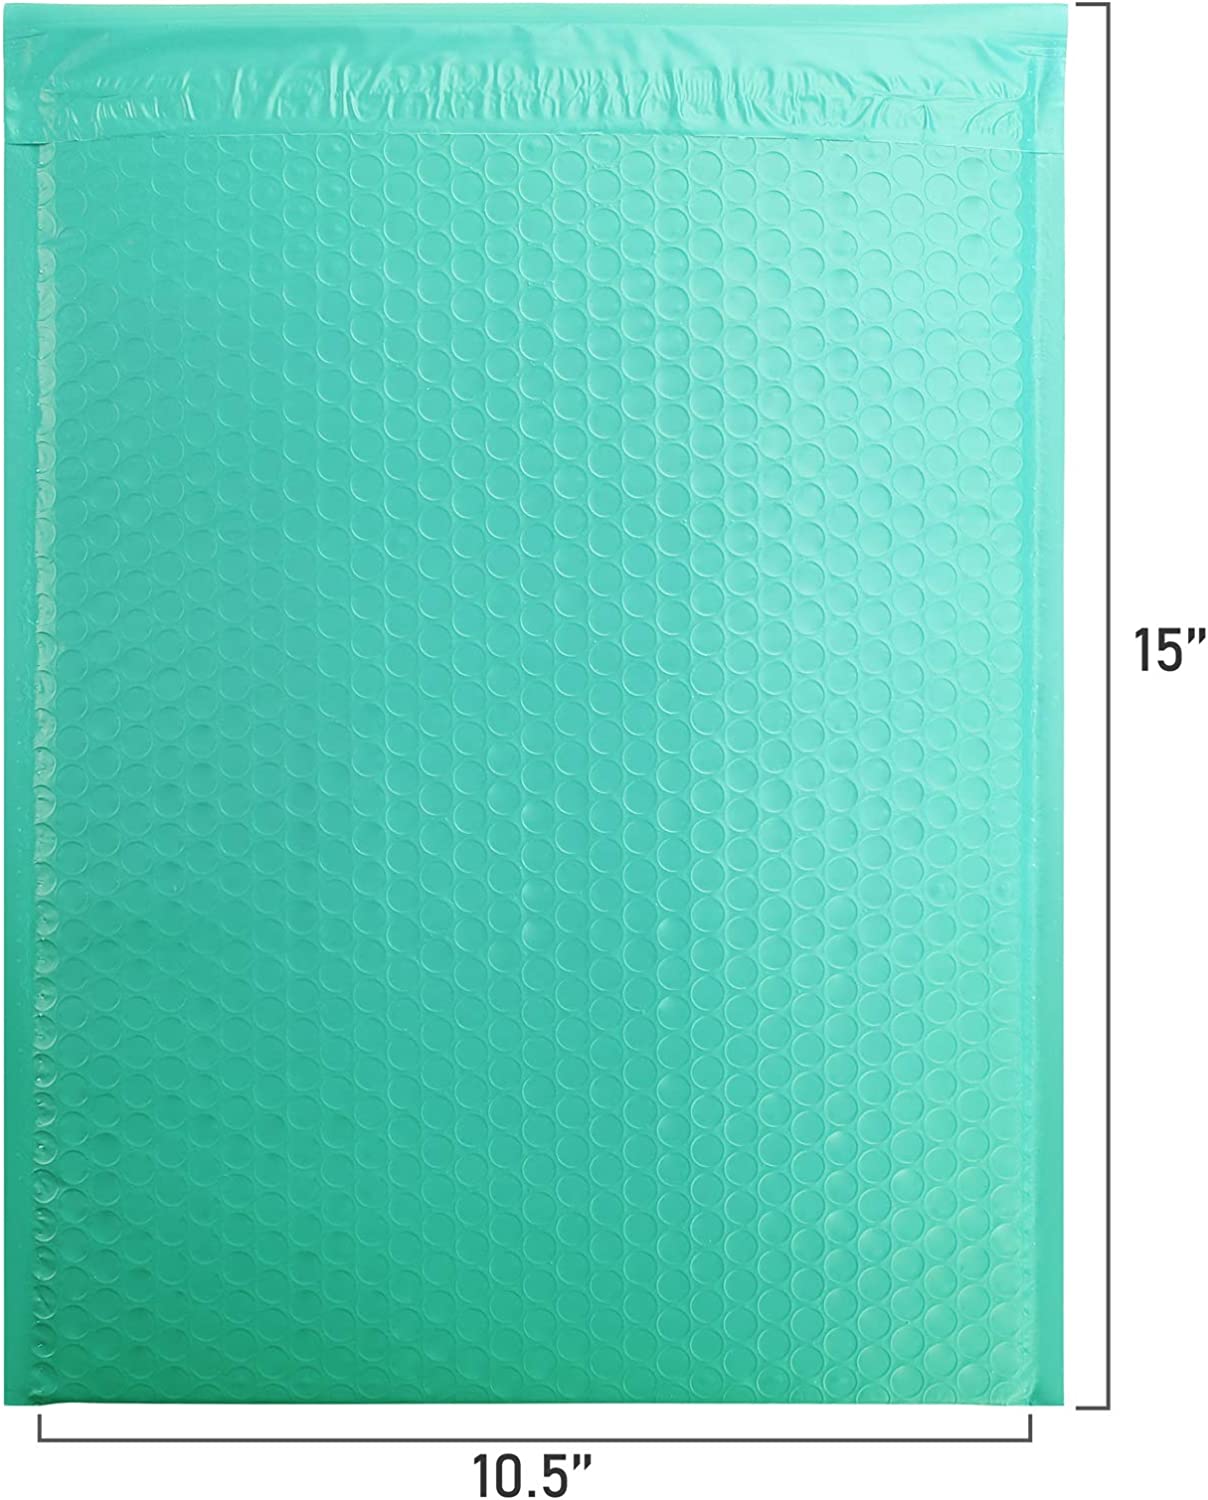 10.5x16 Bubble-Mailer Padded Envelope | Teal